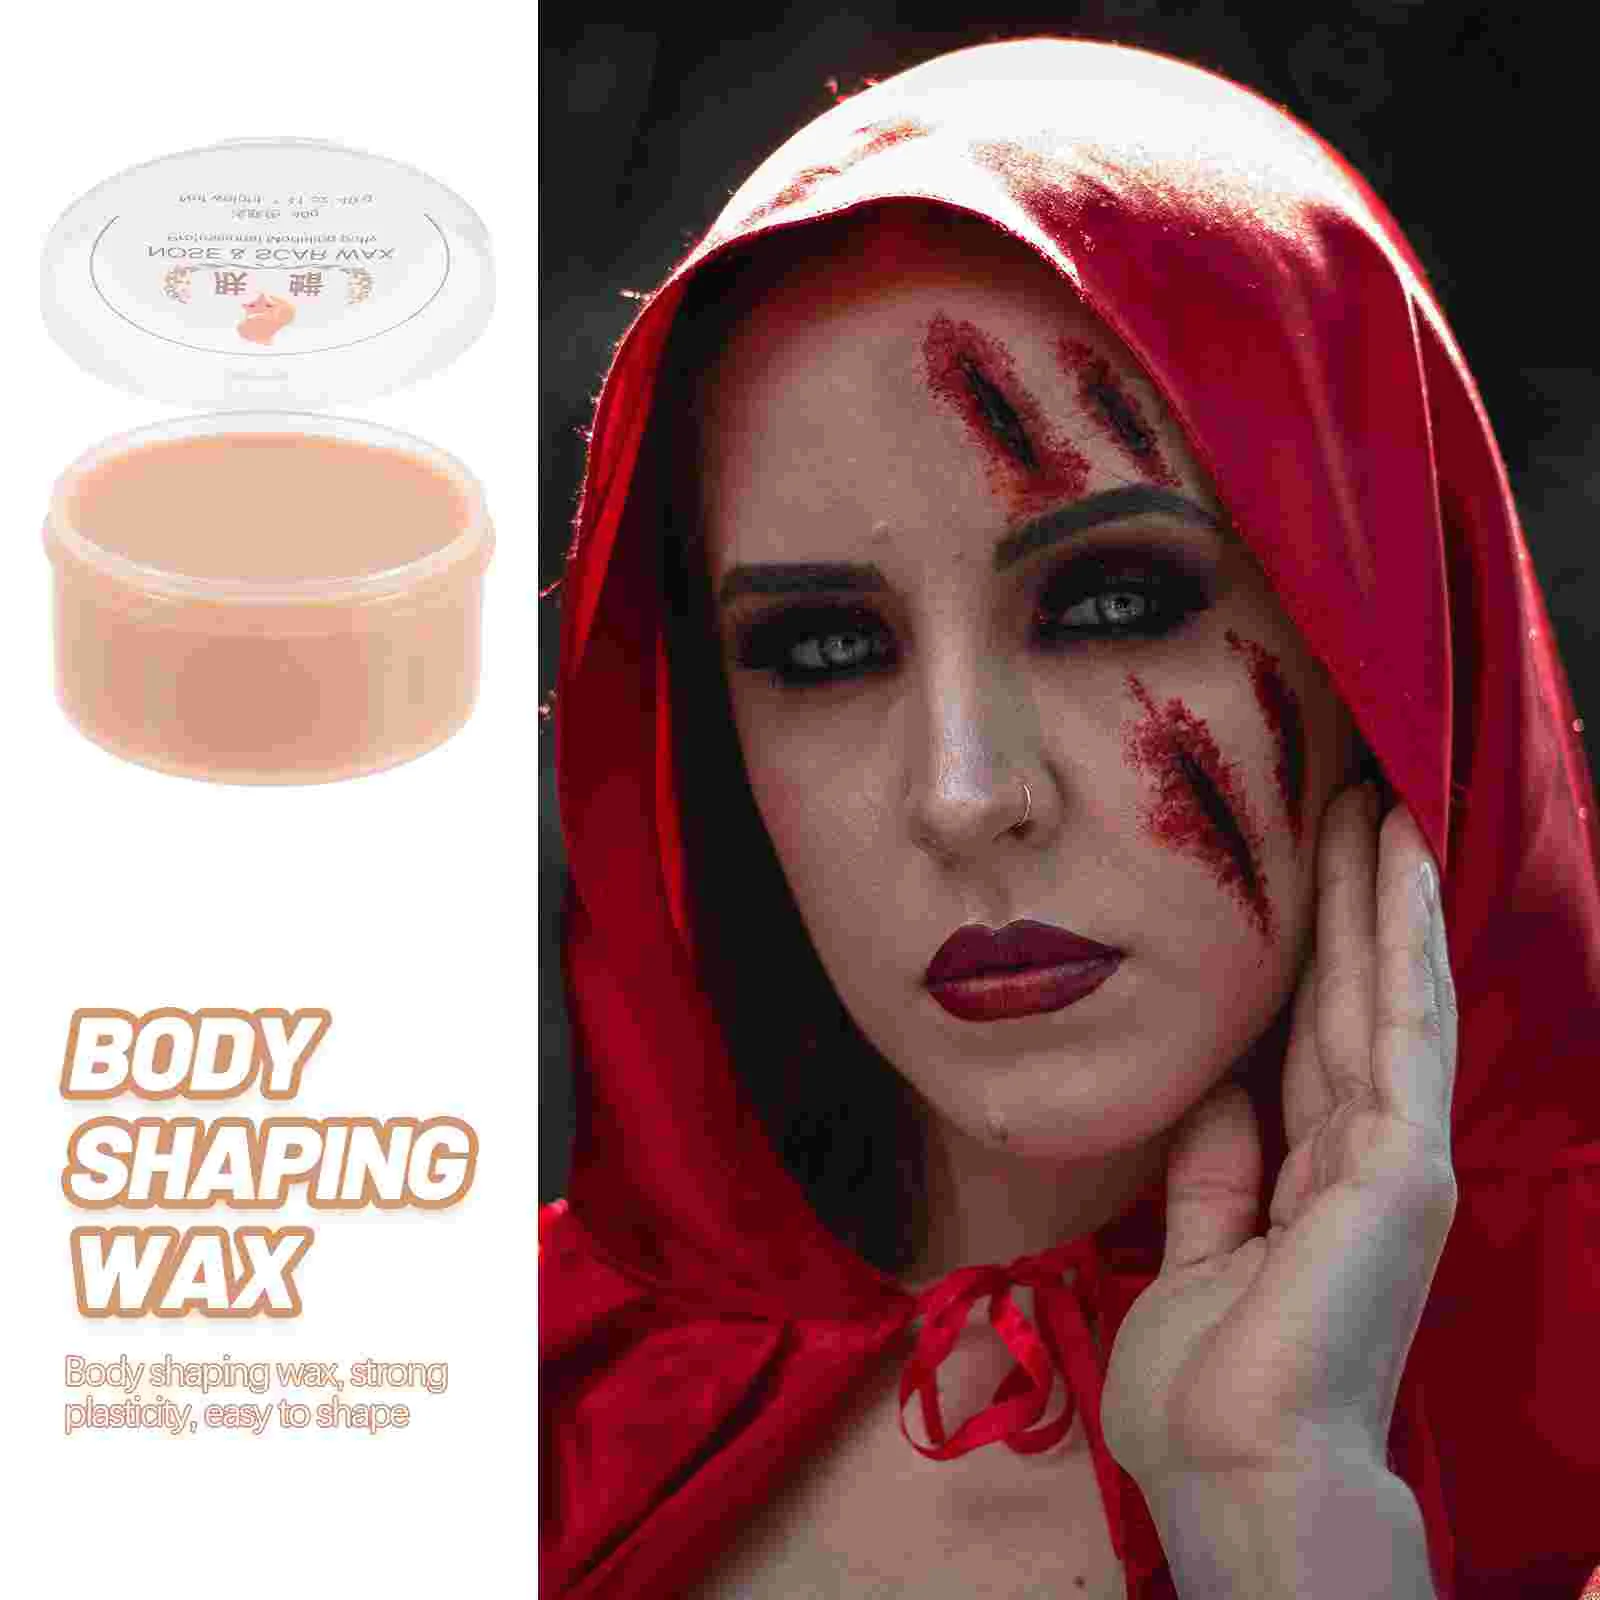 

Skin Wax Modeling Fake Scar Wax Face Fake Wound Wax Makeup Wax for Halloween Special Effects Stage Fake Wound